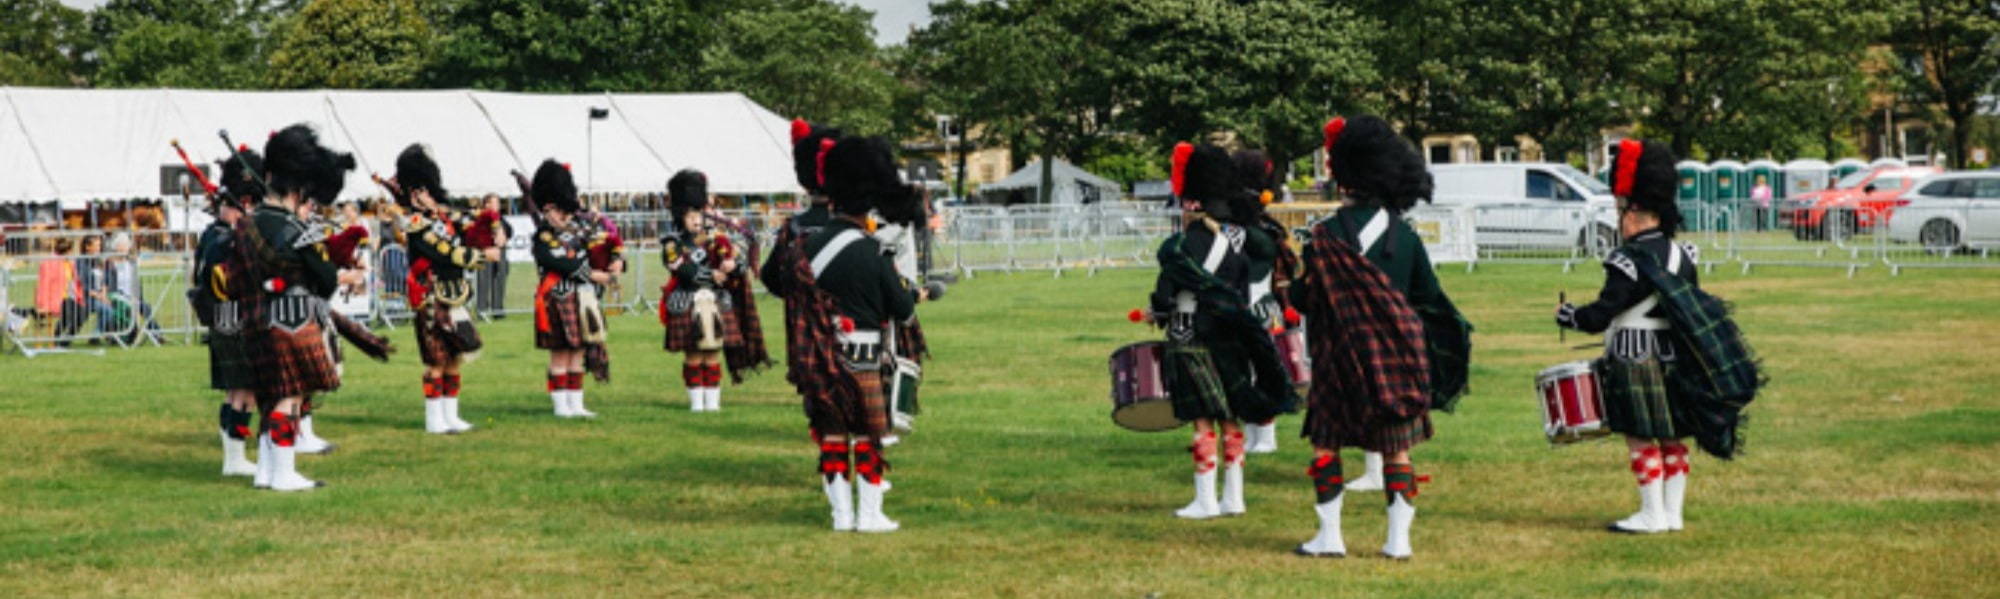 The Halifax Agricultural Show